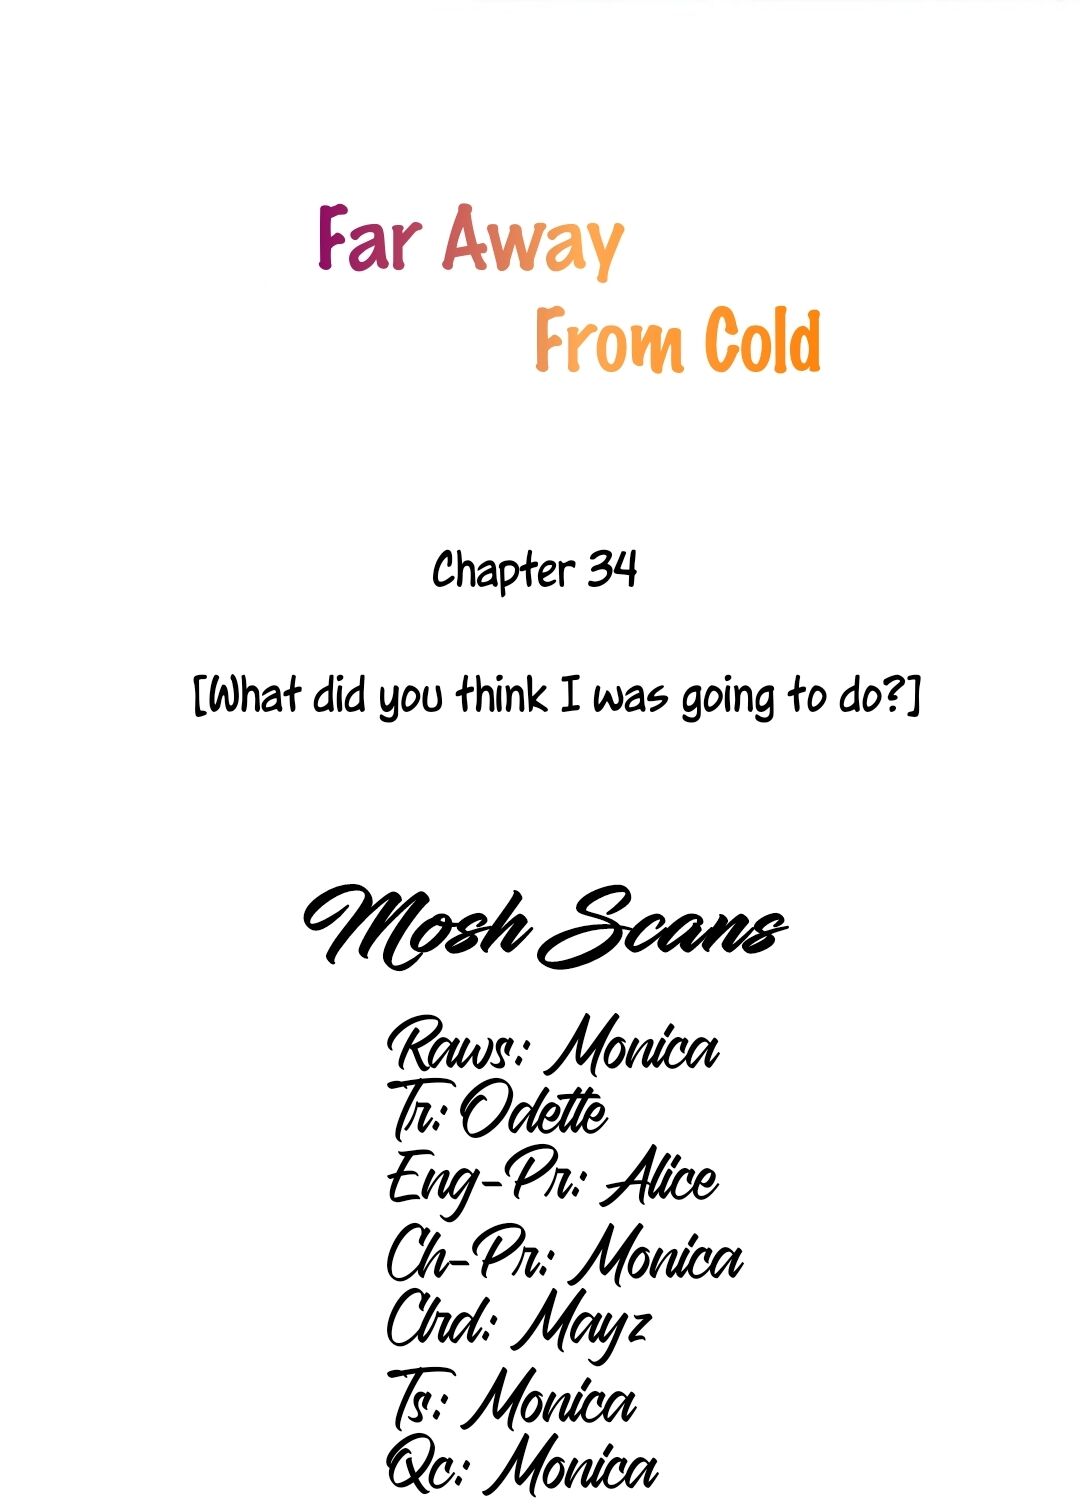 Far Away From Cold - Page 3